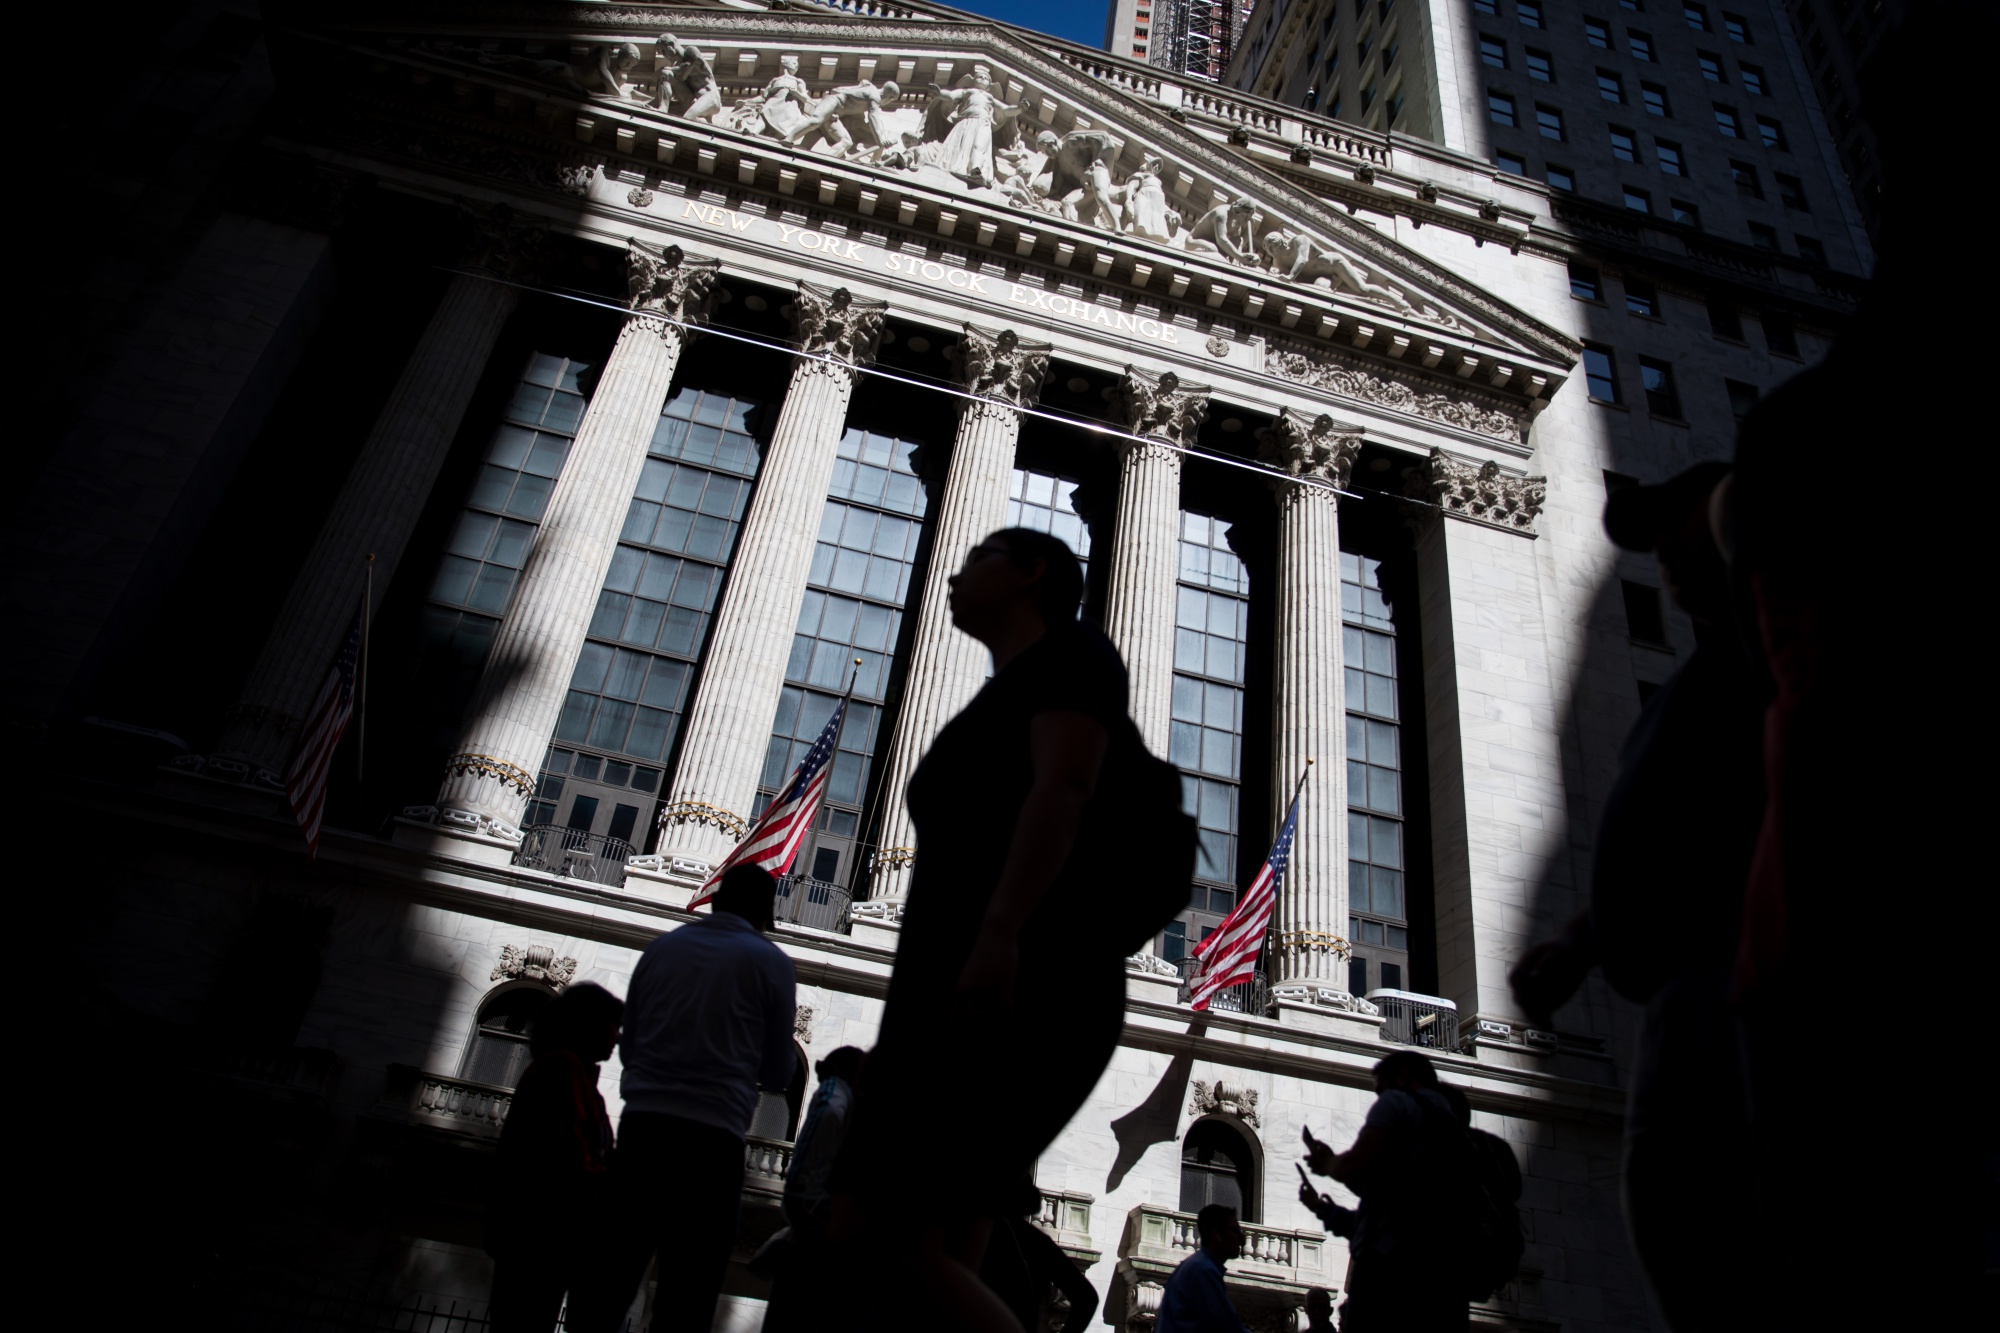 Pedestrians pass in front of the New York Stock Exchange (NYSE) in New York, U.S.